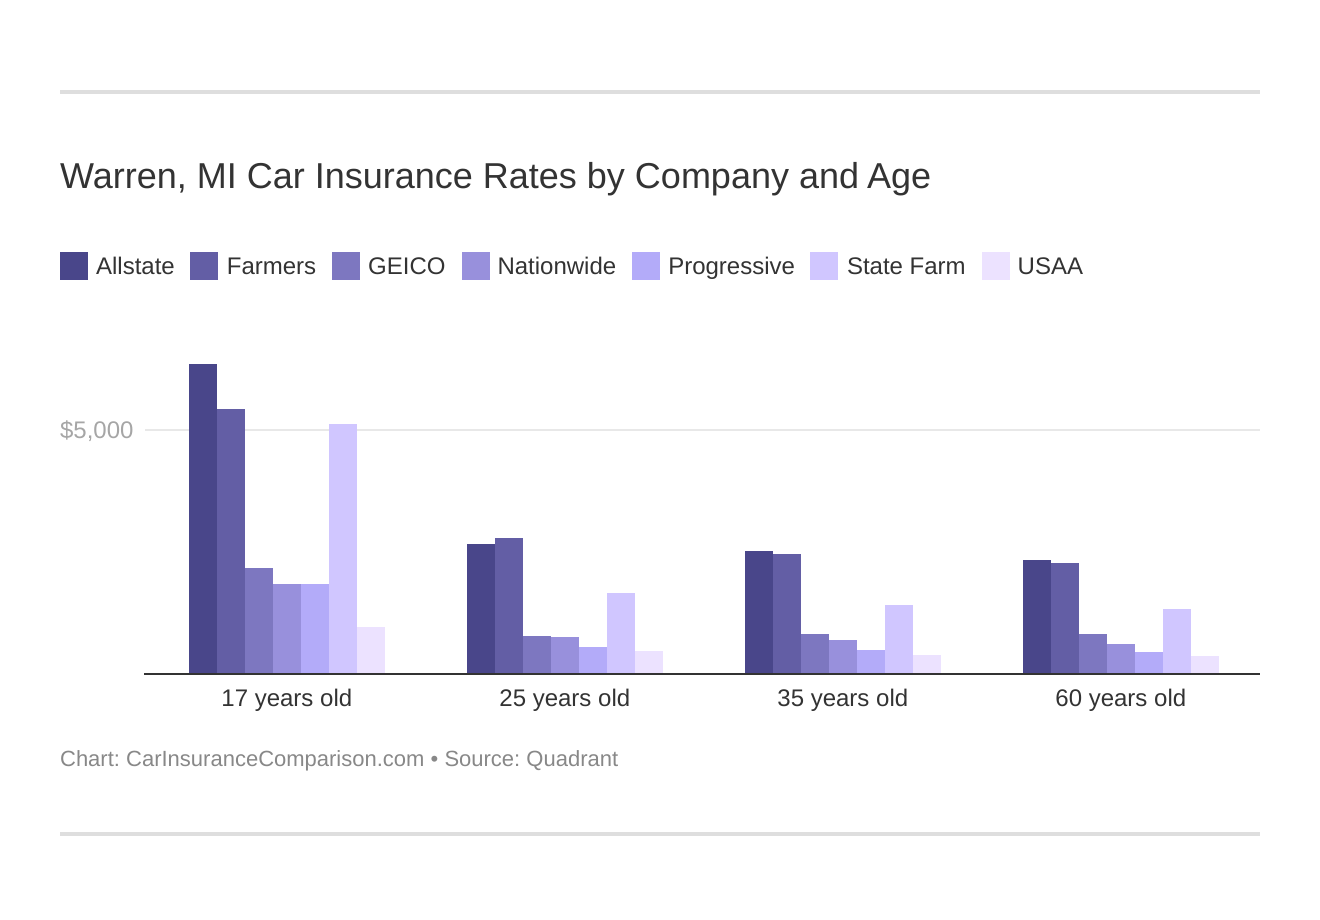 Warren, MI Car Insurance Rates by Company and Age